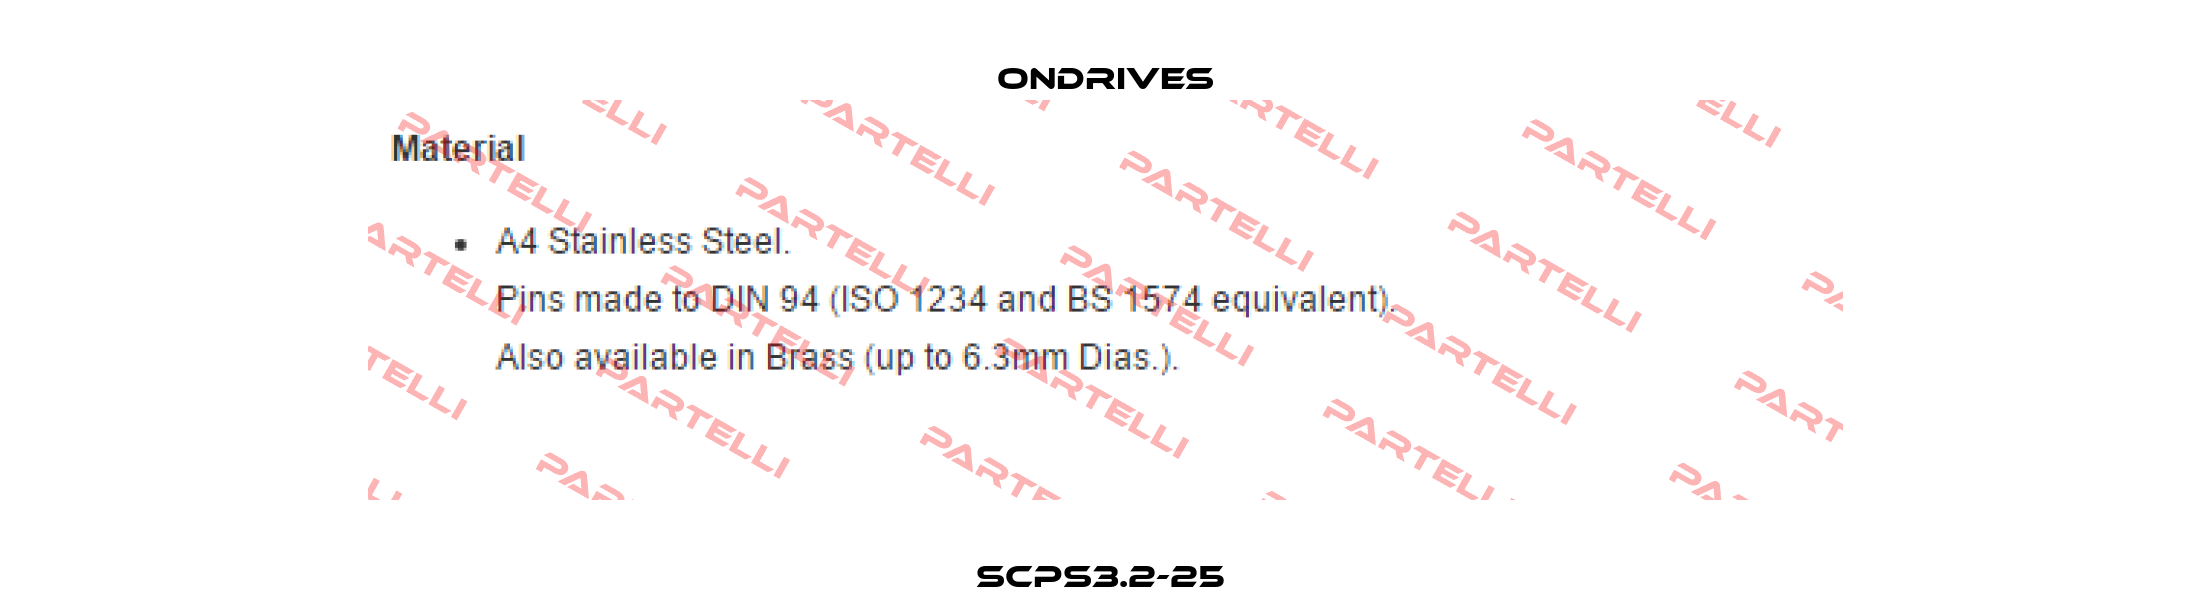 SCPS3.2-25  Ondrives